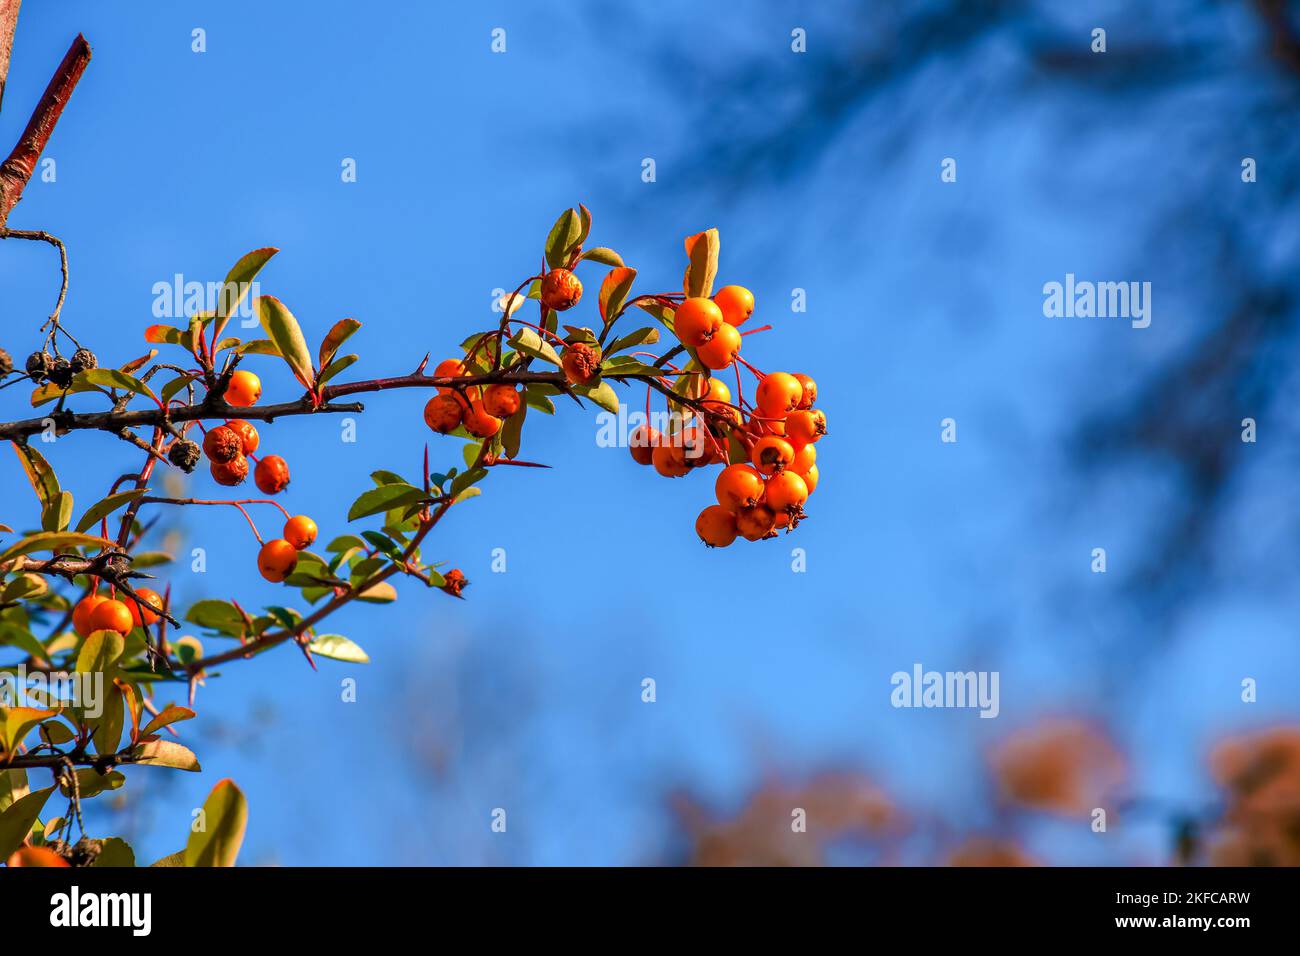 Bright red berries of Pyracantha coccinea, scarlet fiery fruits on a branch of a tree growing in the park. Blurred green bush and blue sky in the back Stock Photo